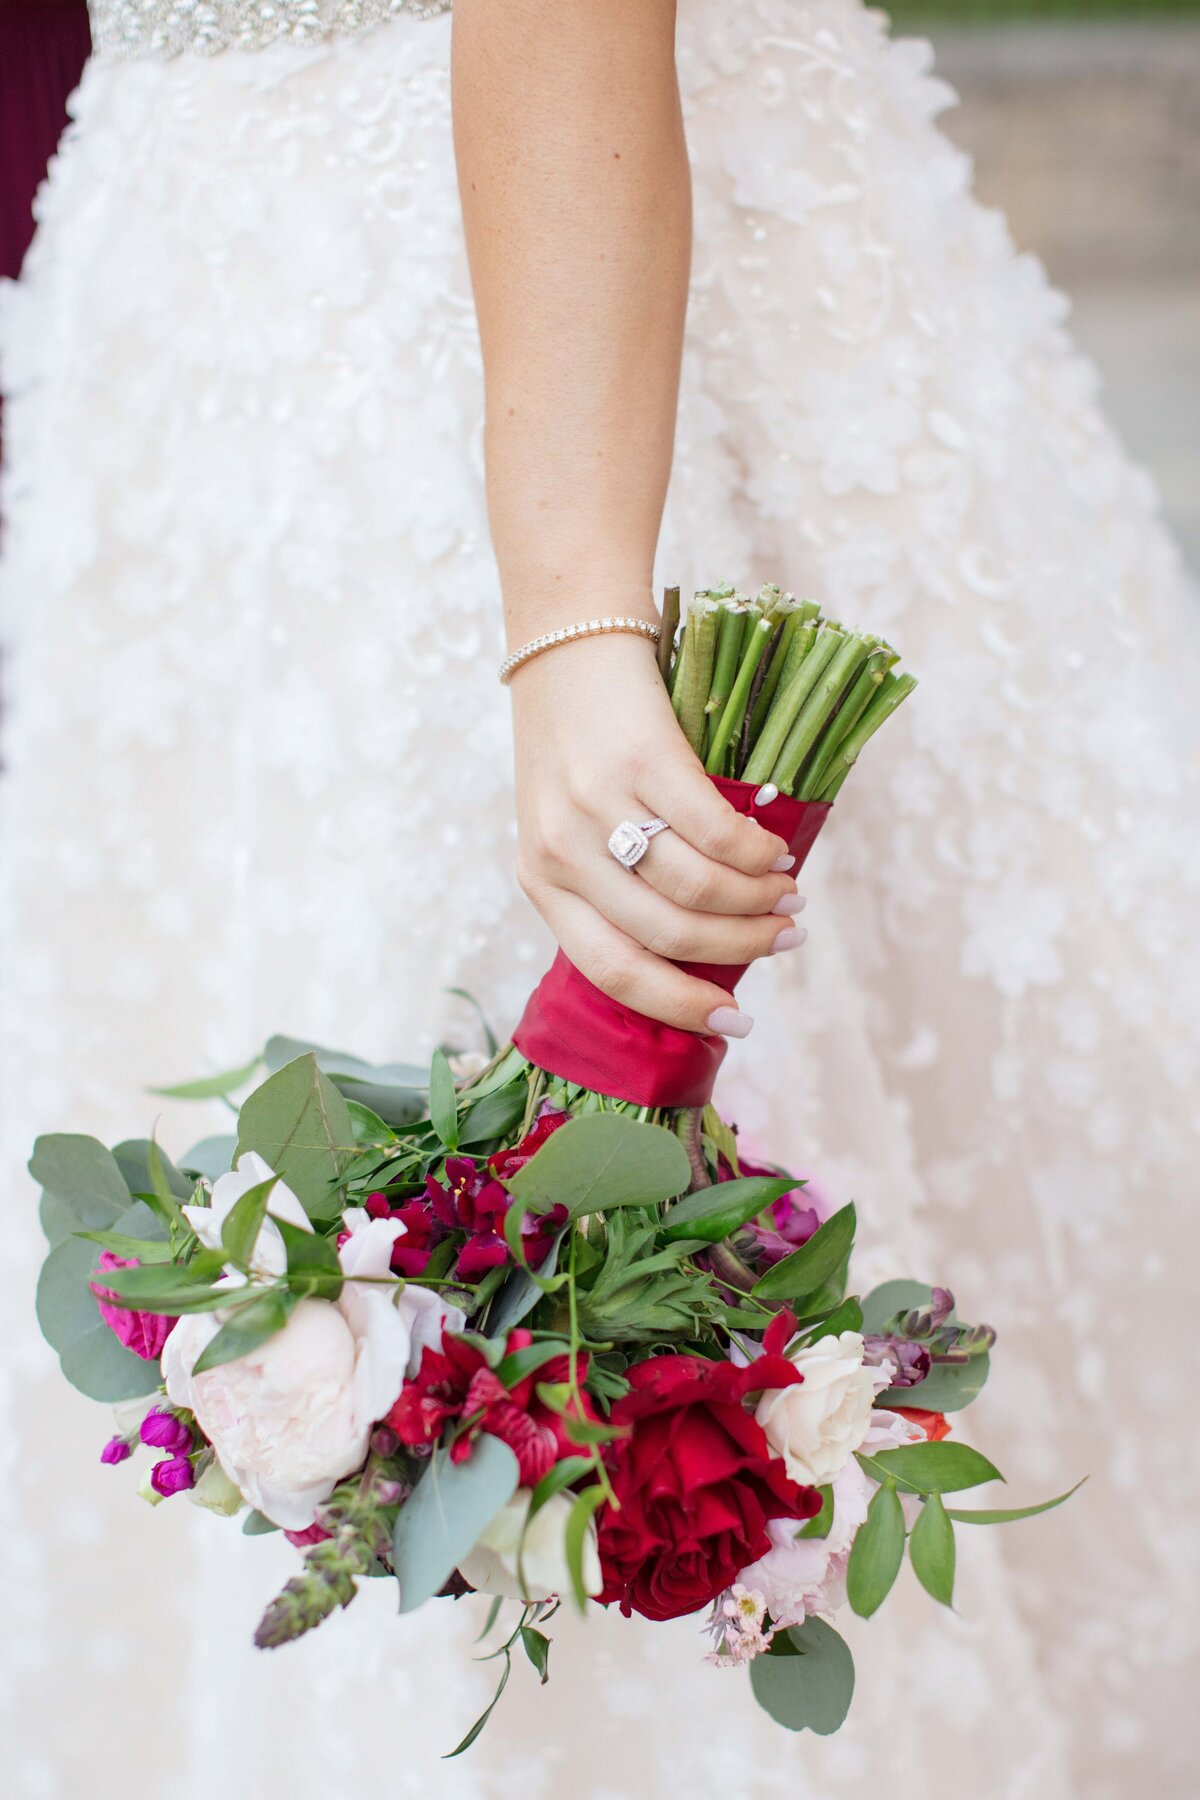 bouquet by Evember Floral and New Braunfels wedding photographer Firefly Photography